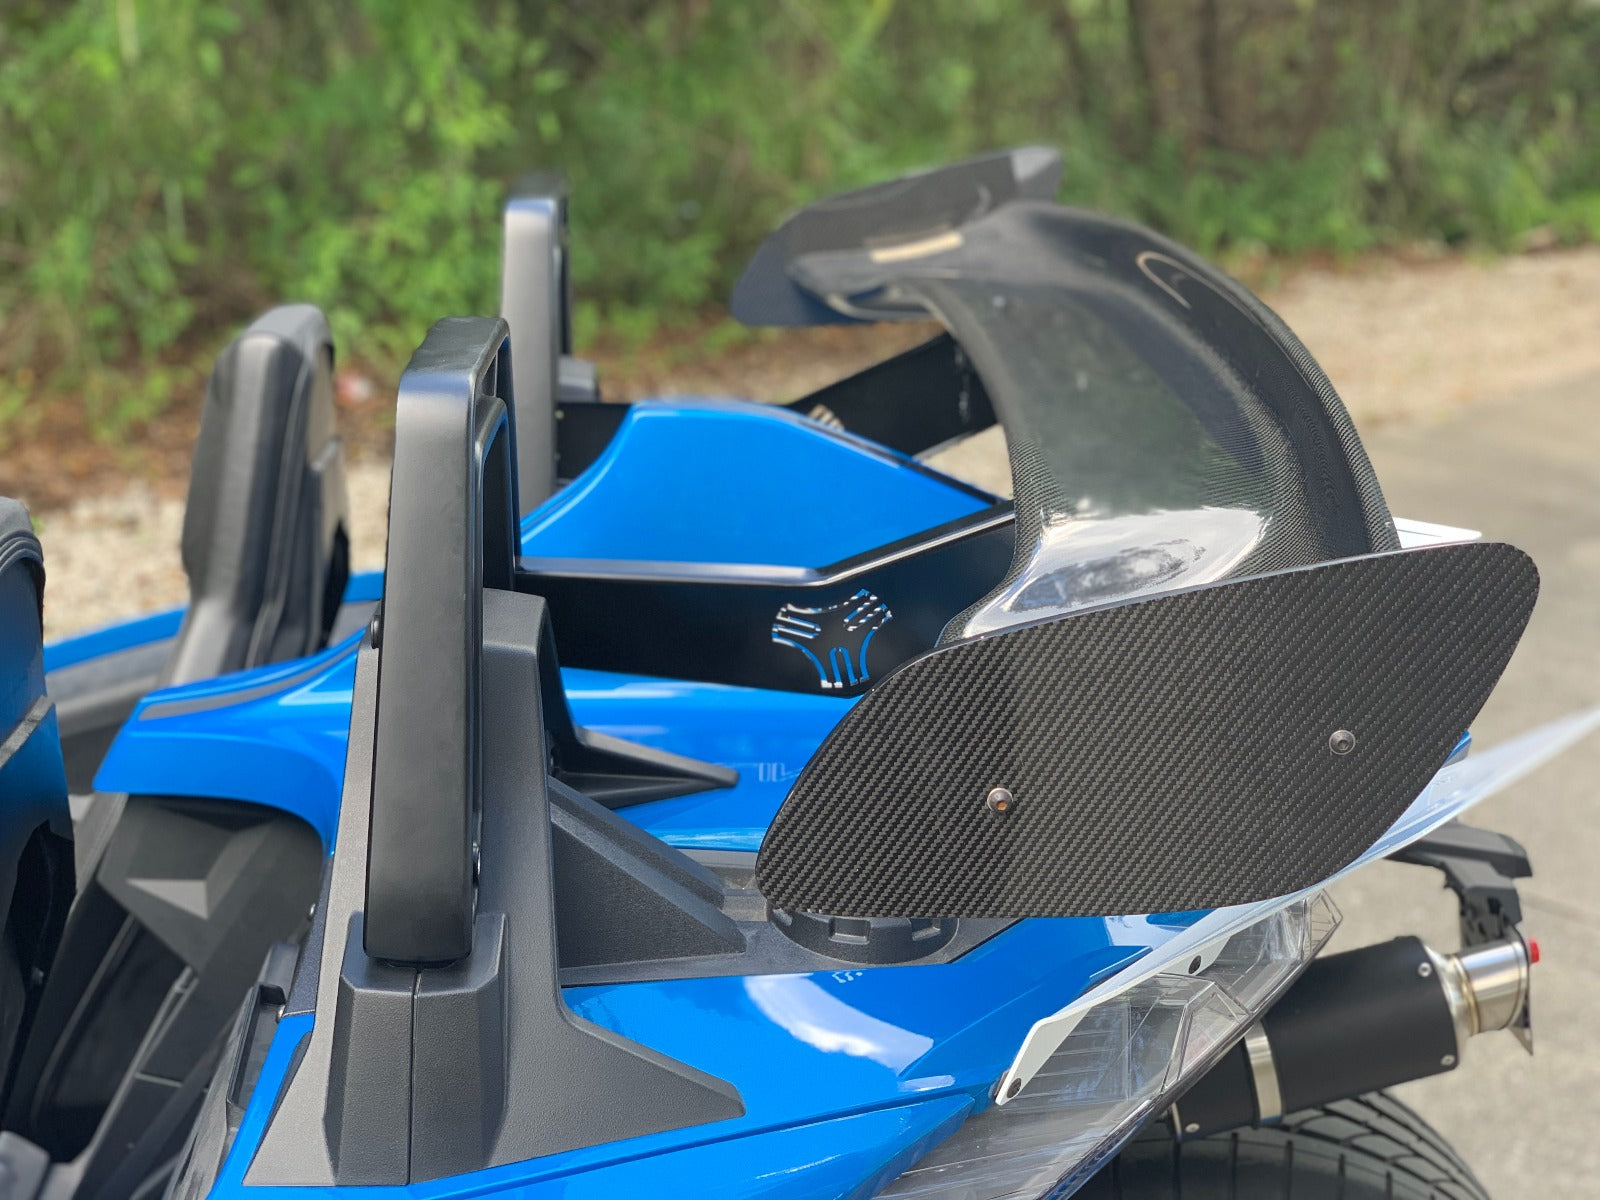 TWIST DYNAMICS REAR WING KIT FOR THE POLARIS SLINGSHOT - LARGE CARBON FIBER  WING WITH BRACKETS